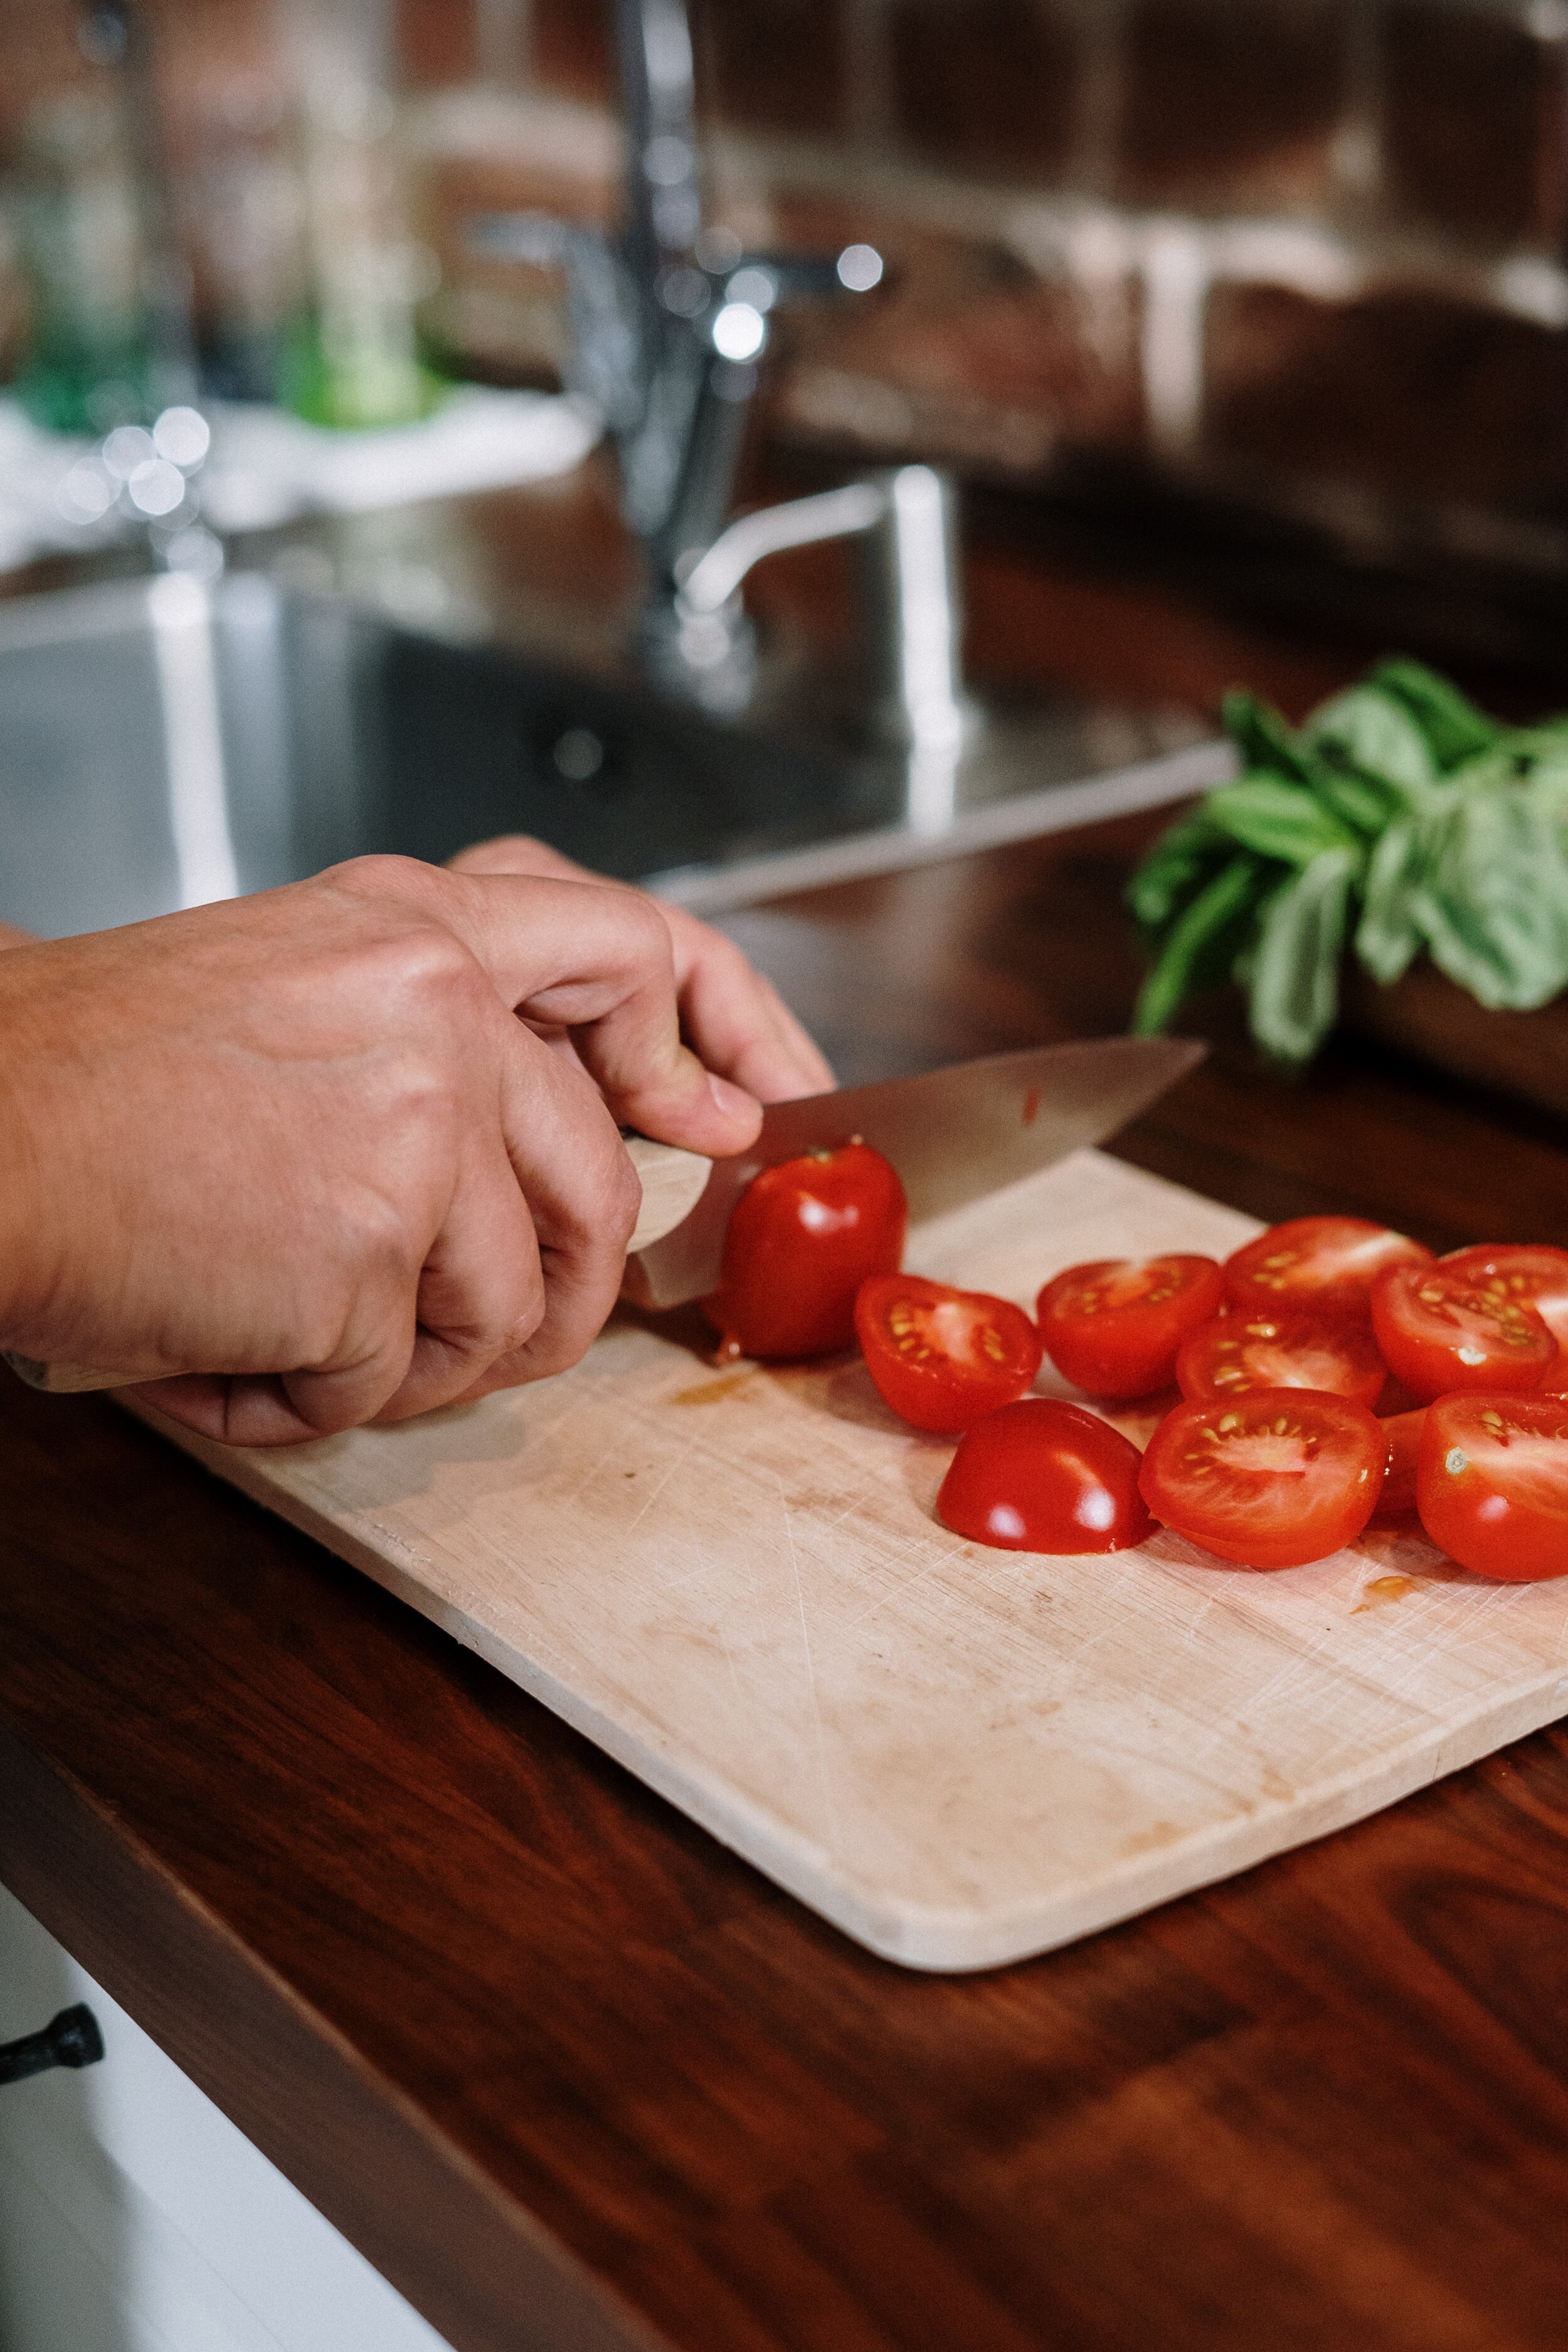 photo-of-person-slicing-tomatoes-4057683.jpg